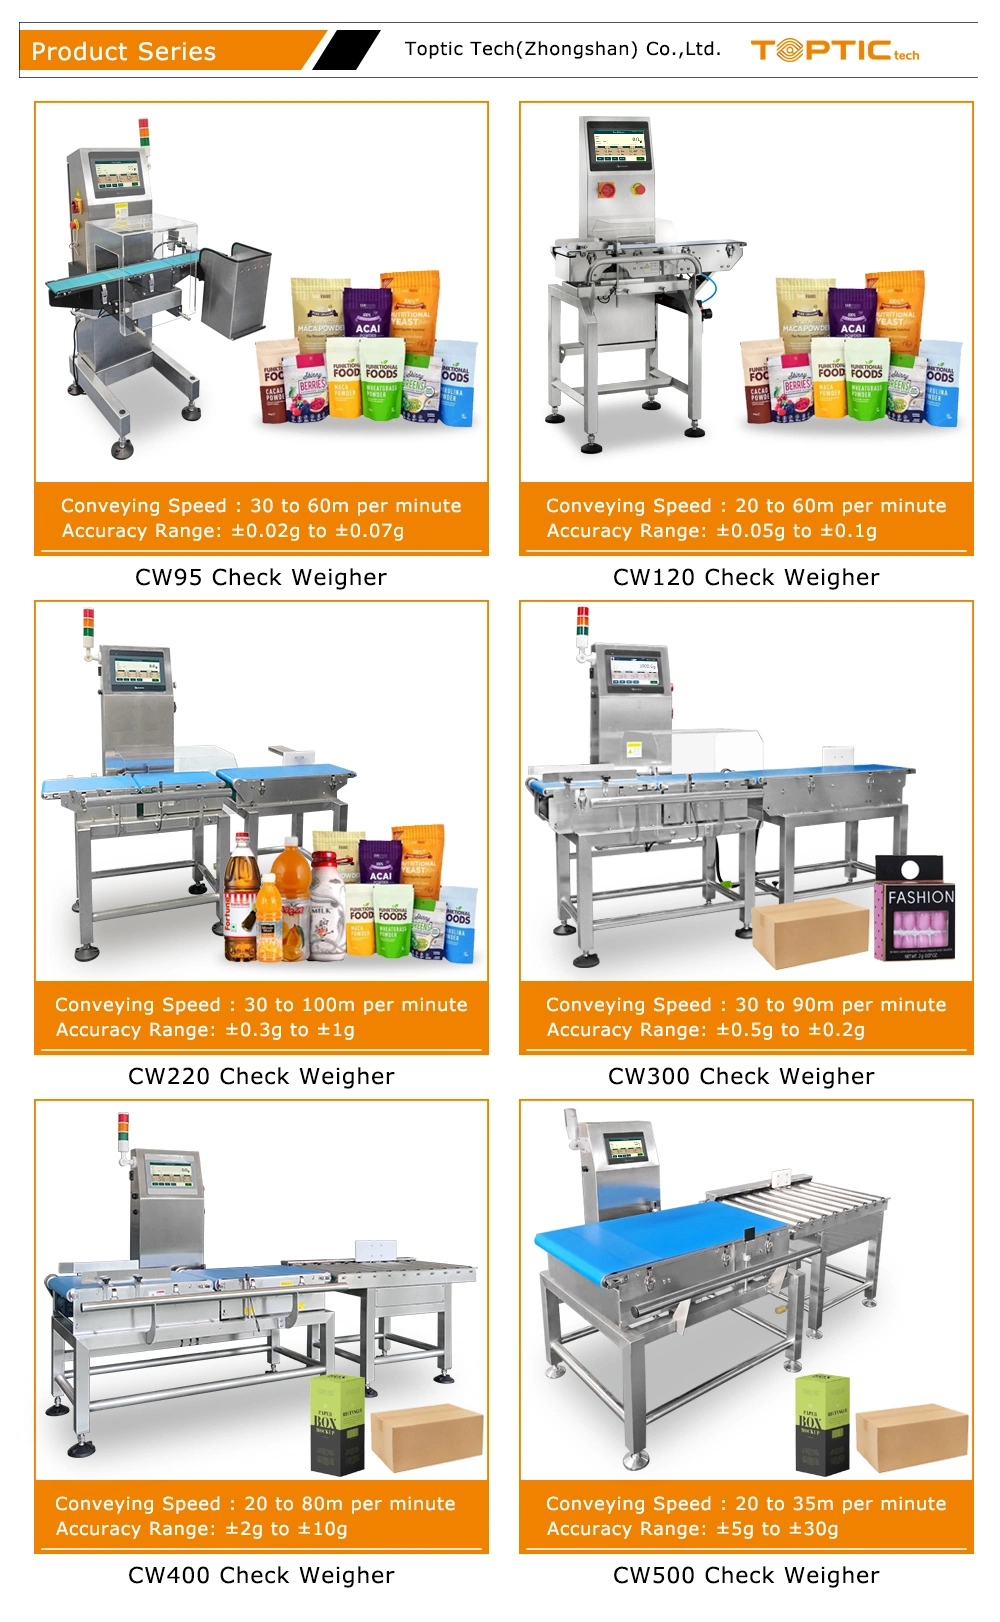 Chinese Automatic Digital Weighing Scale/Conveyor Belt Roller Scale/Check Weight Machine